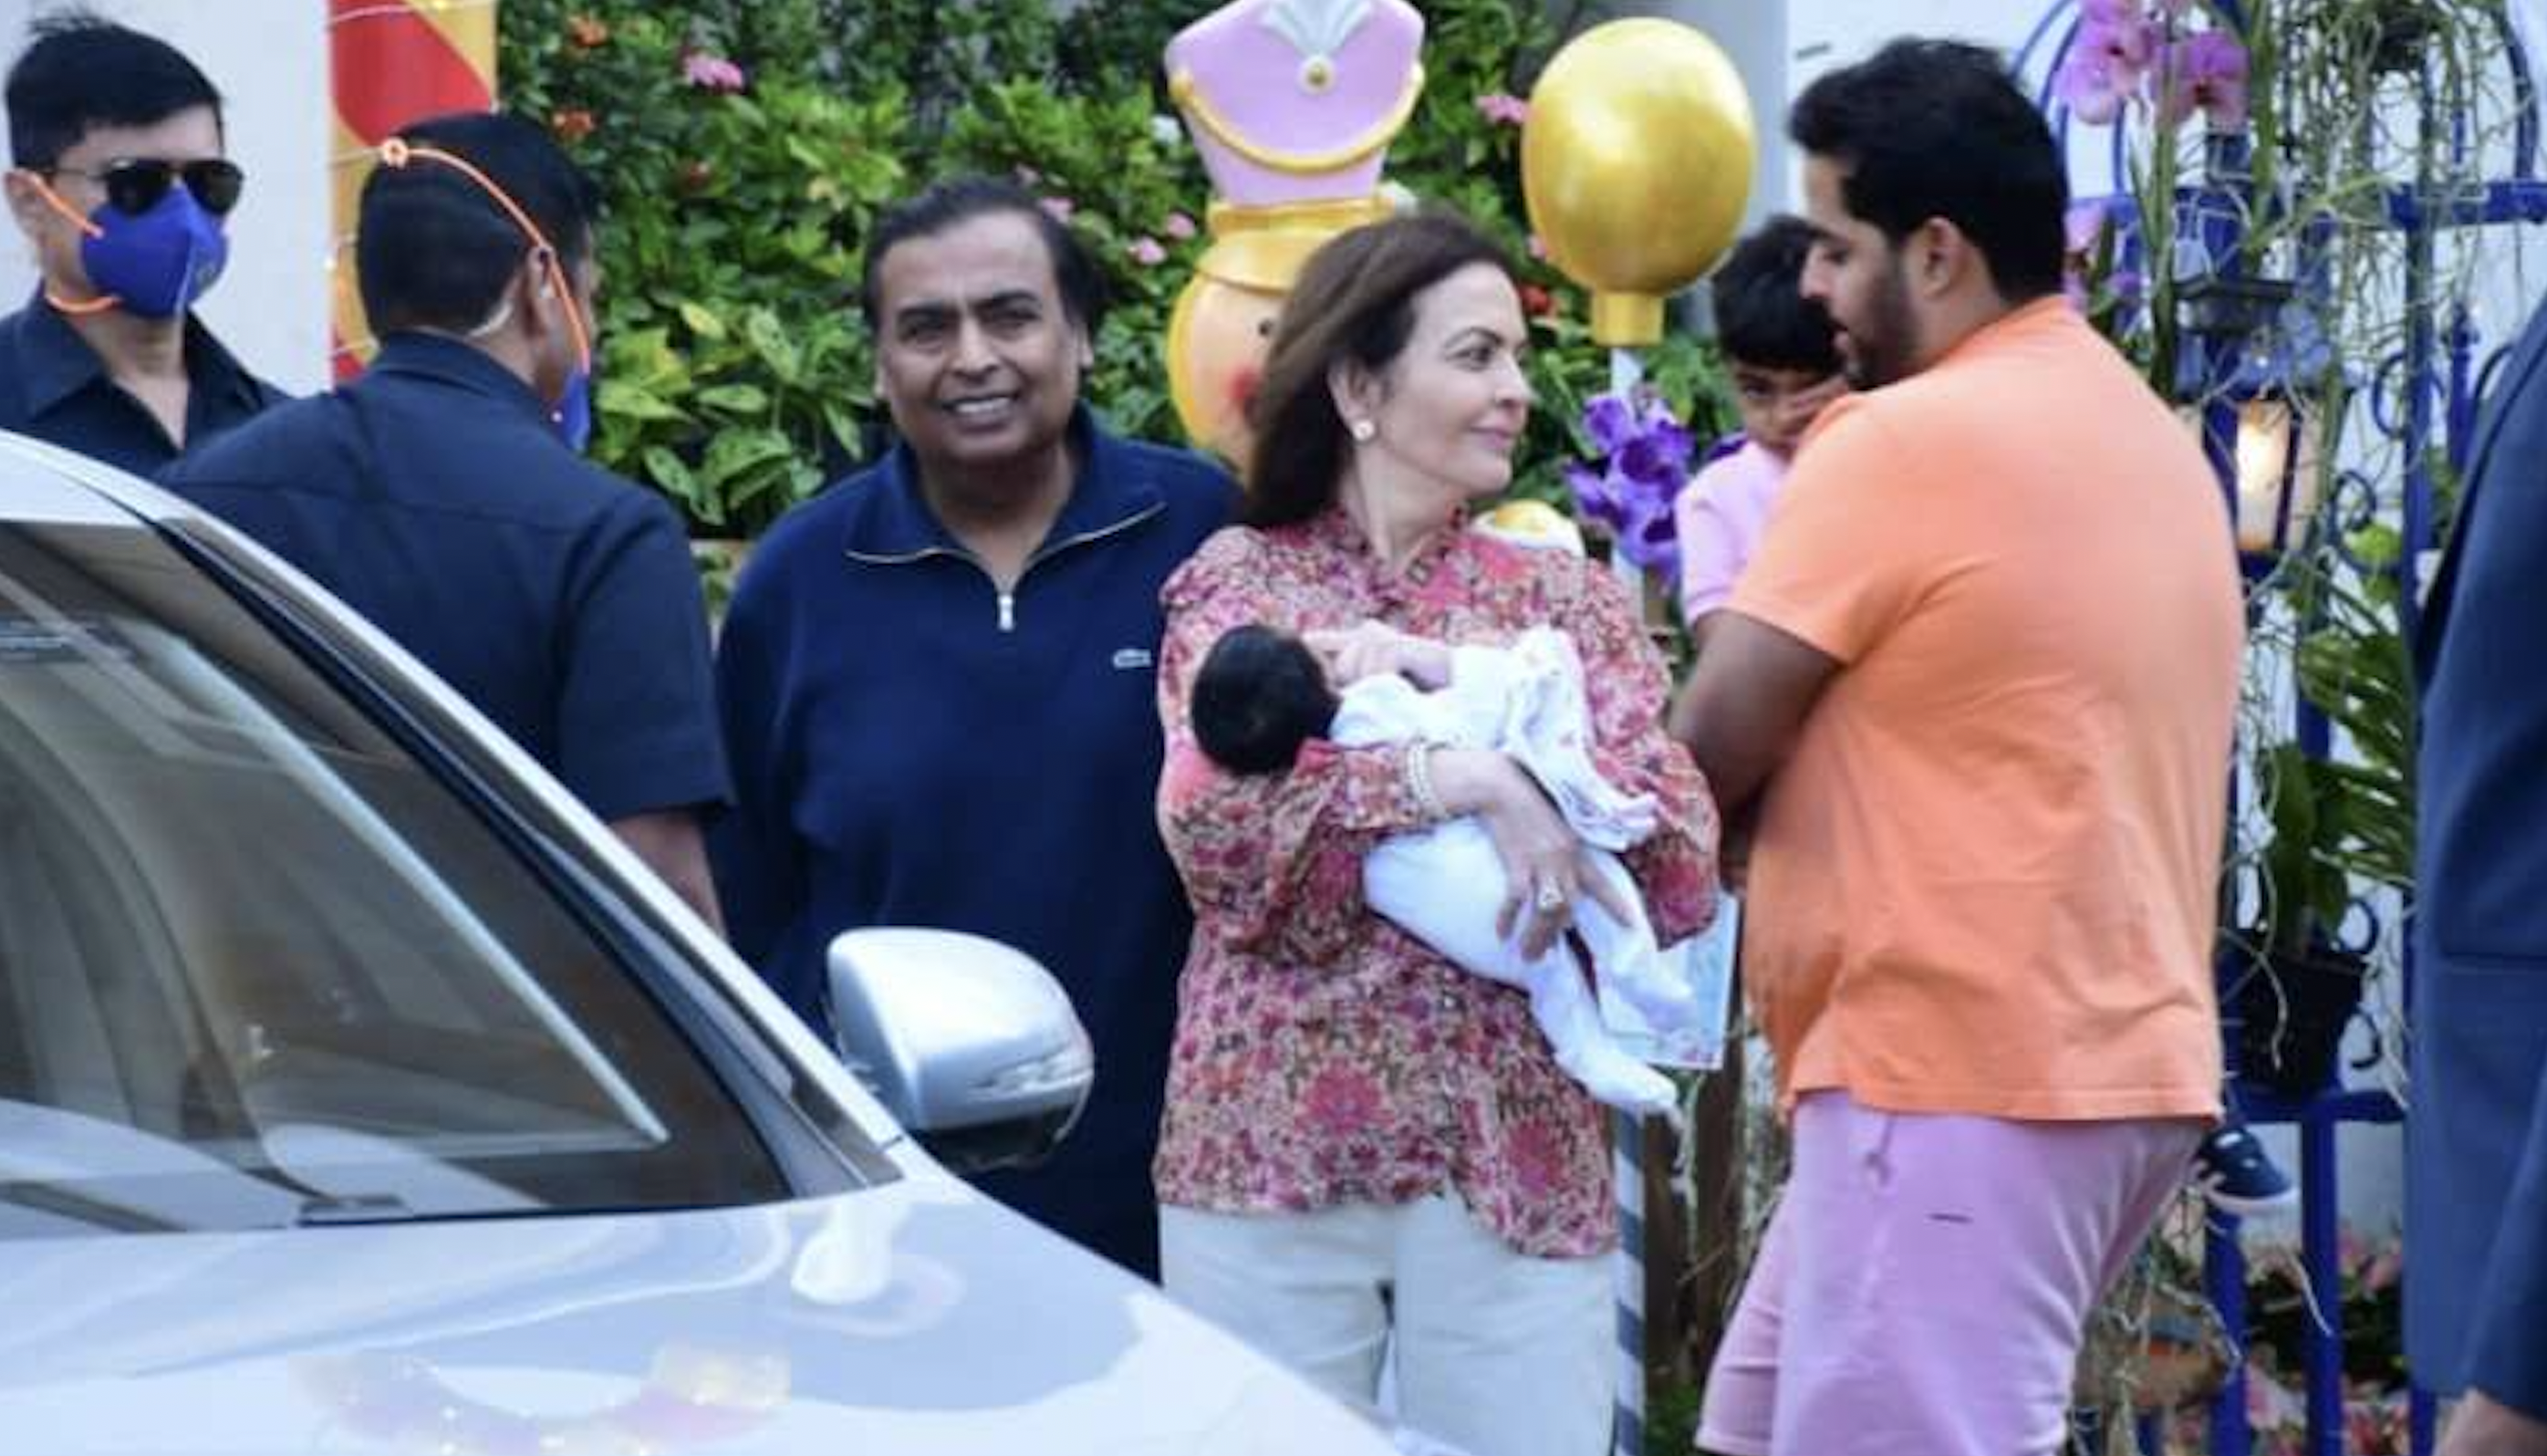 nita-ambani-showed-generosity-after-becoming-a-grandmother-she-is-now-doing-paddy-dharma-and-feeding-the-poor